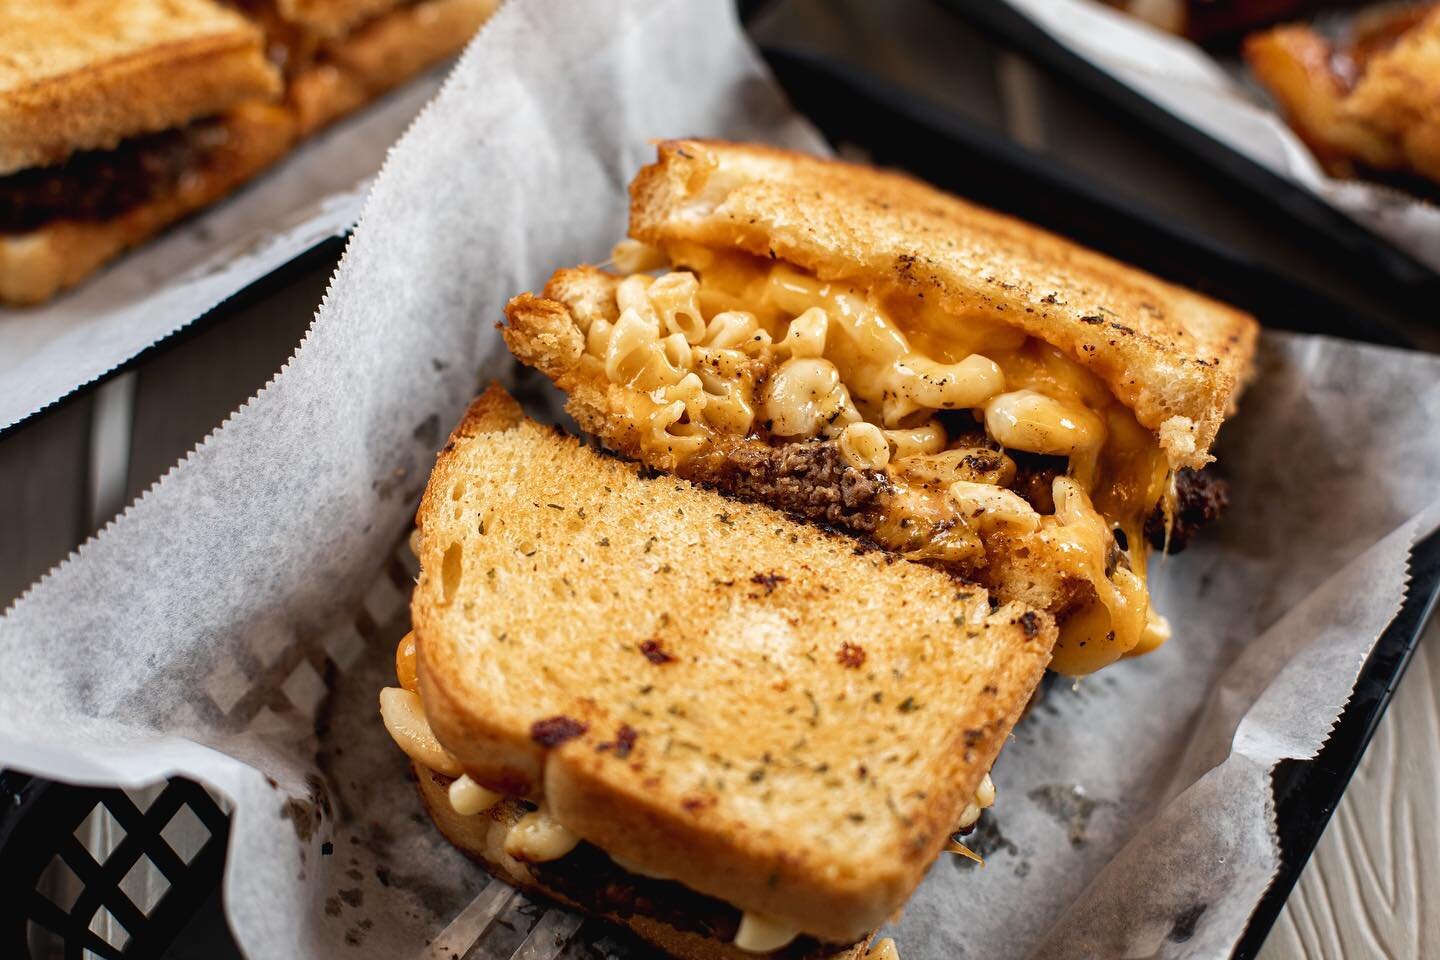 🤤🤤🤤
Mac and Cheese Burger Melt - MELT Pensacola 
2 fresh beef patties, choice of mac, cheddar cheese, Melt sauce

🍴EAT WITH US⁣
11-9⁣
⁣
🍹DRINK WITH US⁣
11-'til

🌱HAPPY HOUR
3-6 Monday-Friday